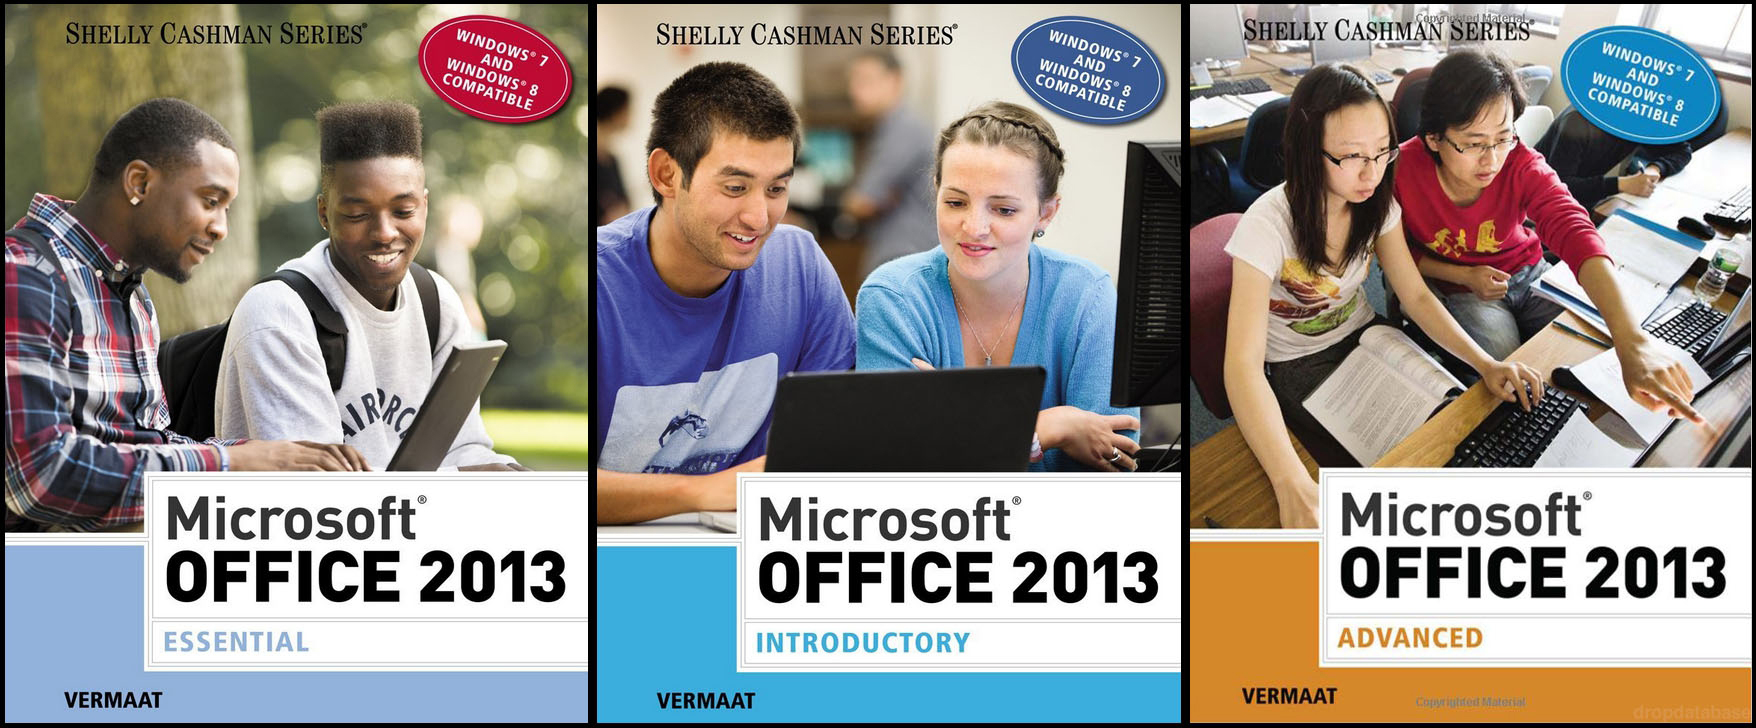 accidental racism - Shelly Cashman Series Shelly Cashman Series Shelly Casunan Sertes wer Microsoft Office 2013 Microsoft Office 2013 Introductory Microsoft Office 2013 Essential Advanced Vermaat Vermaat Vermaat